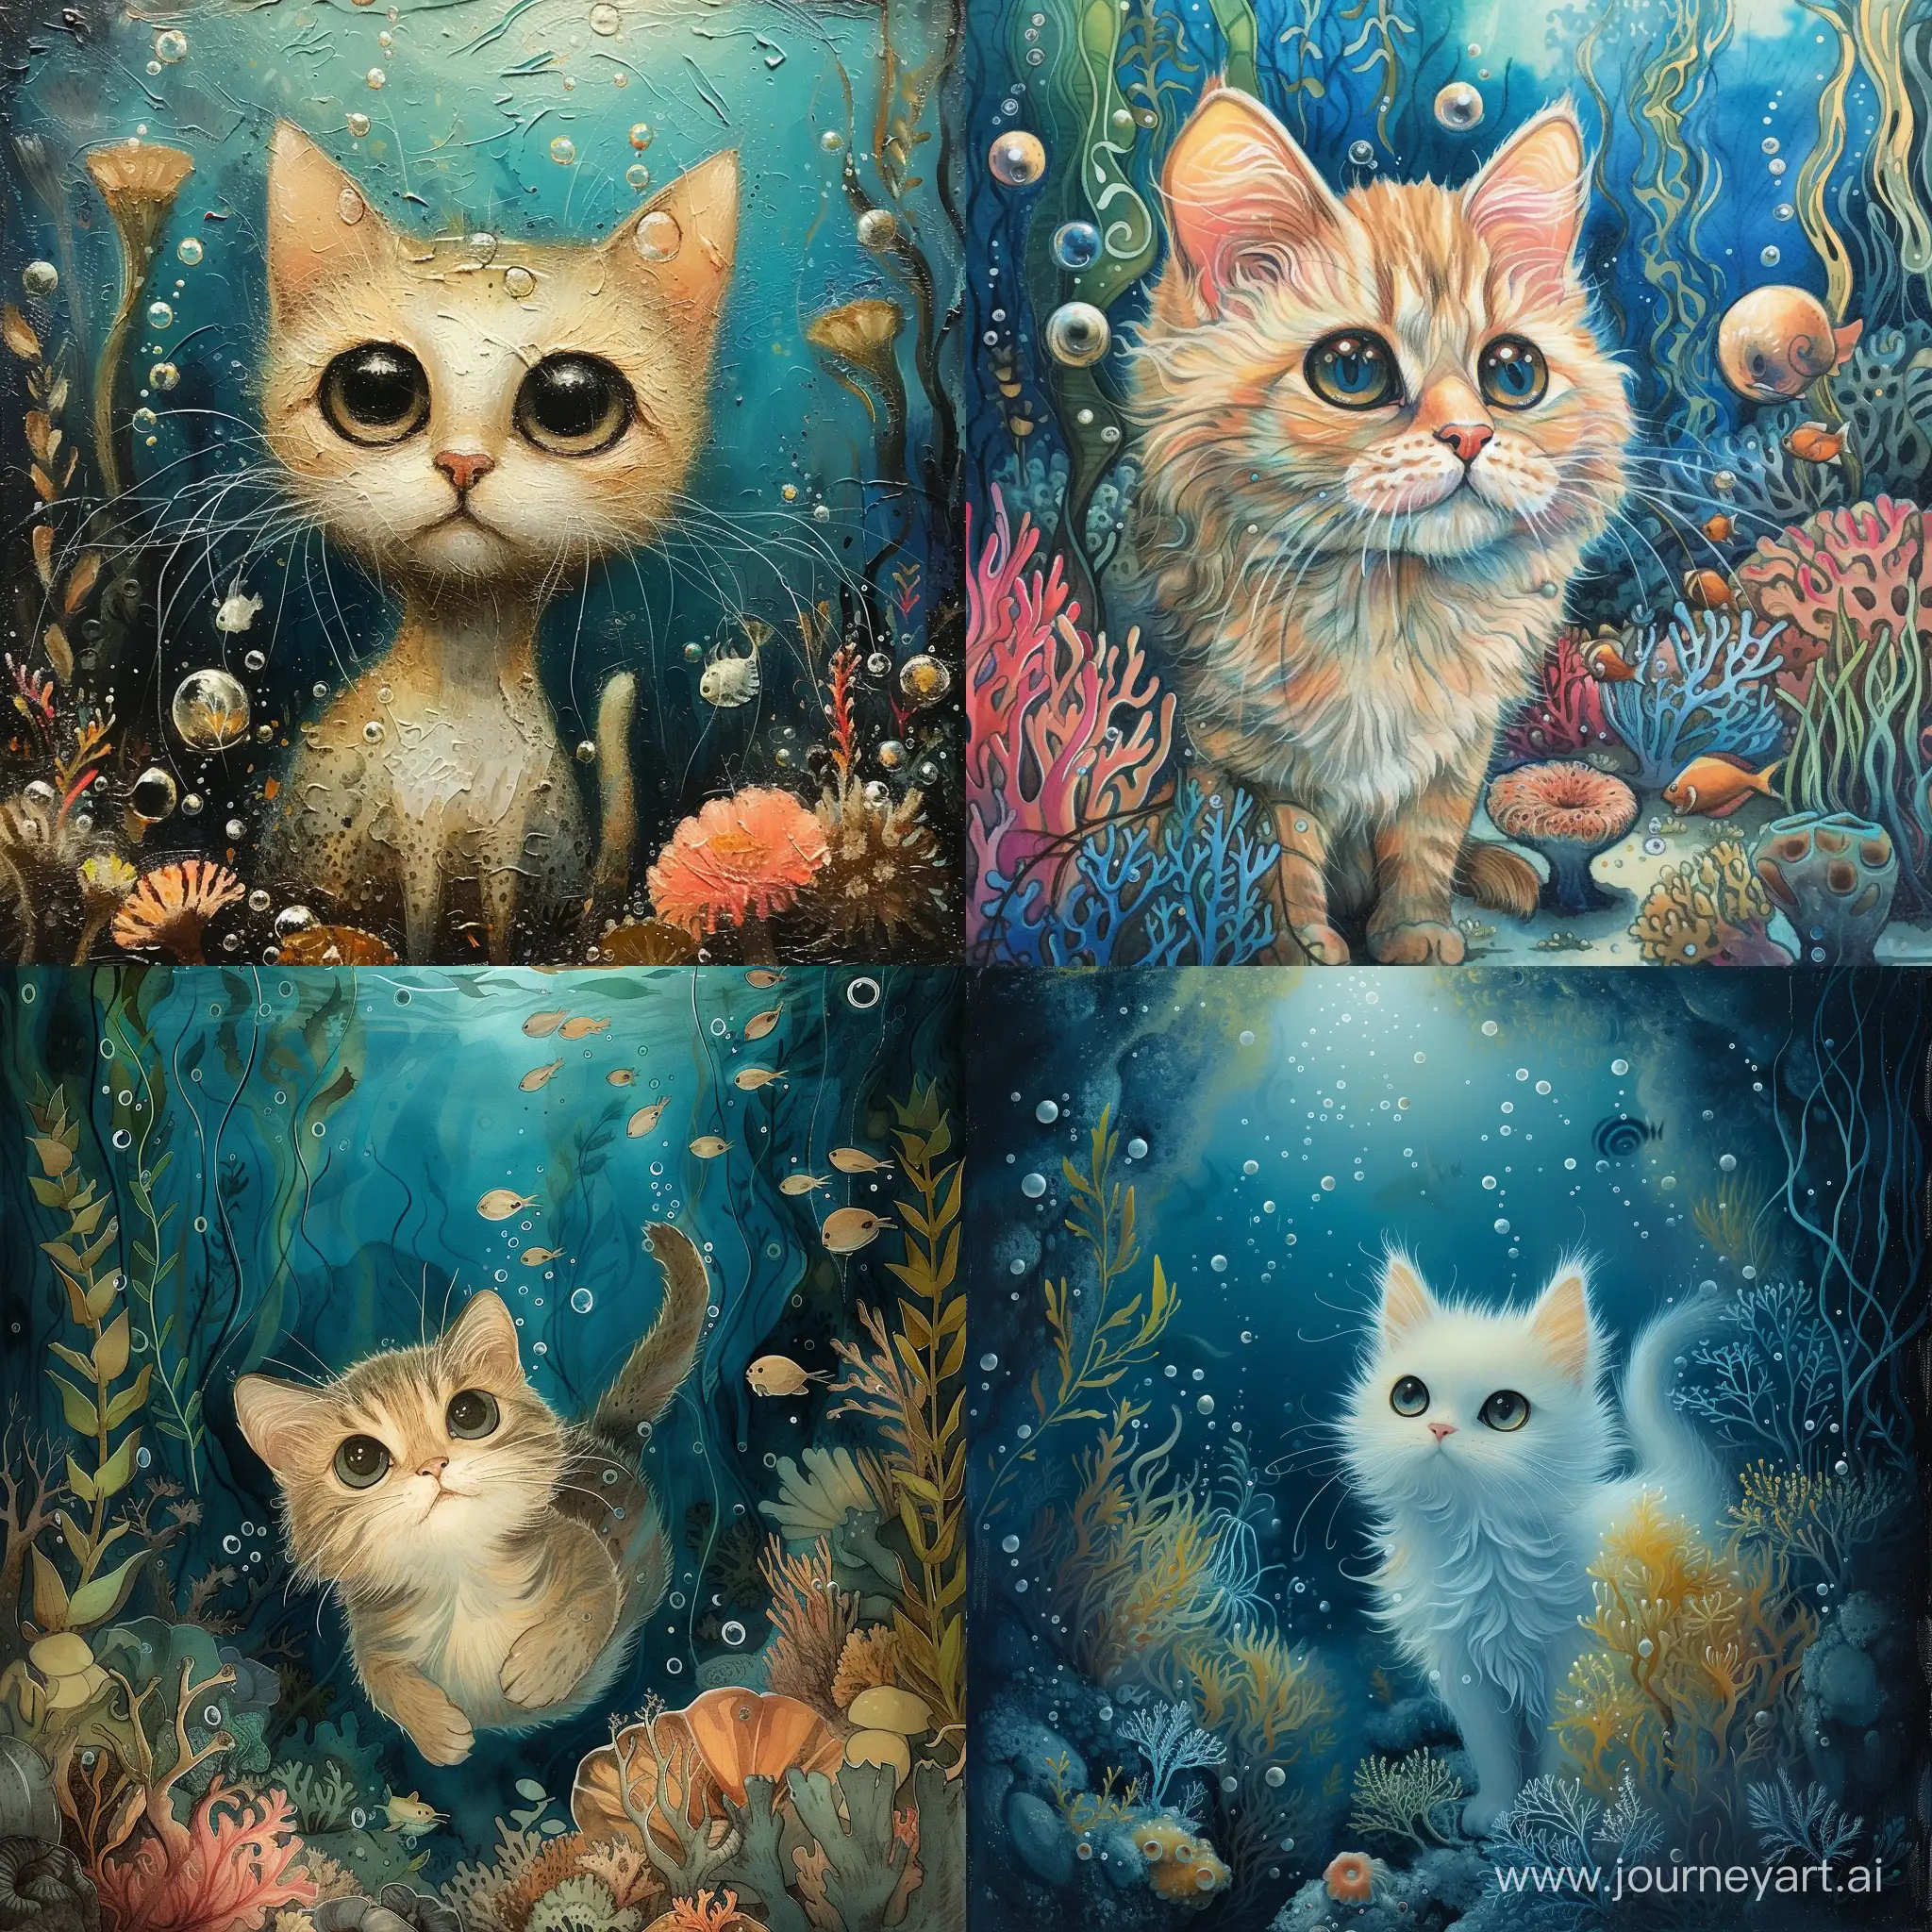 Vibrant-Underwater-Cat-in-a-11-Artistic-Display-Image-47547